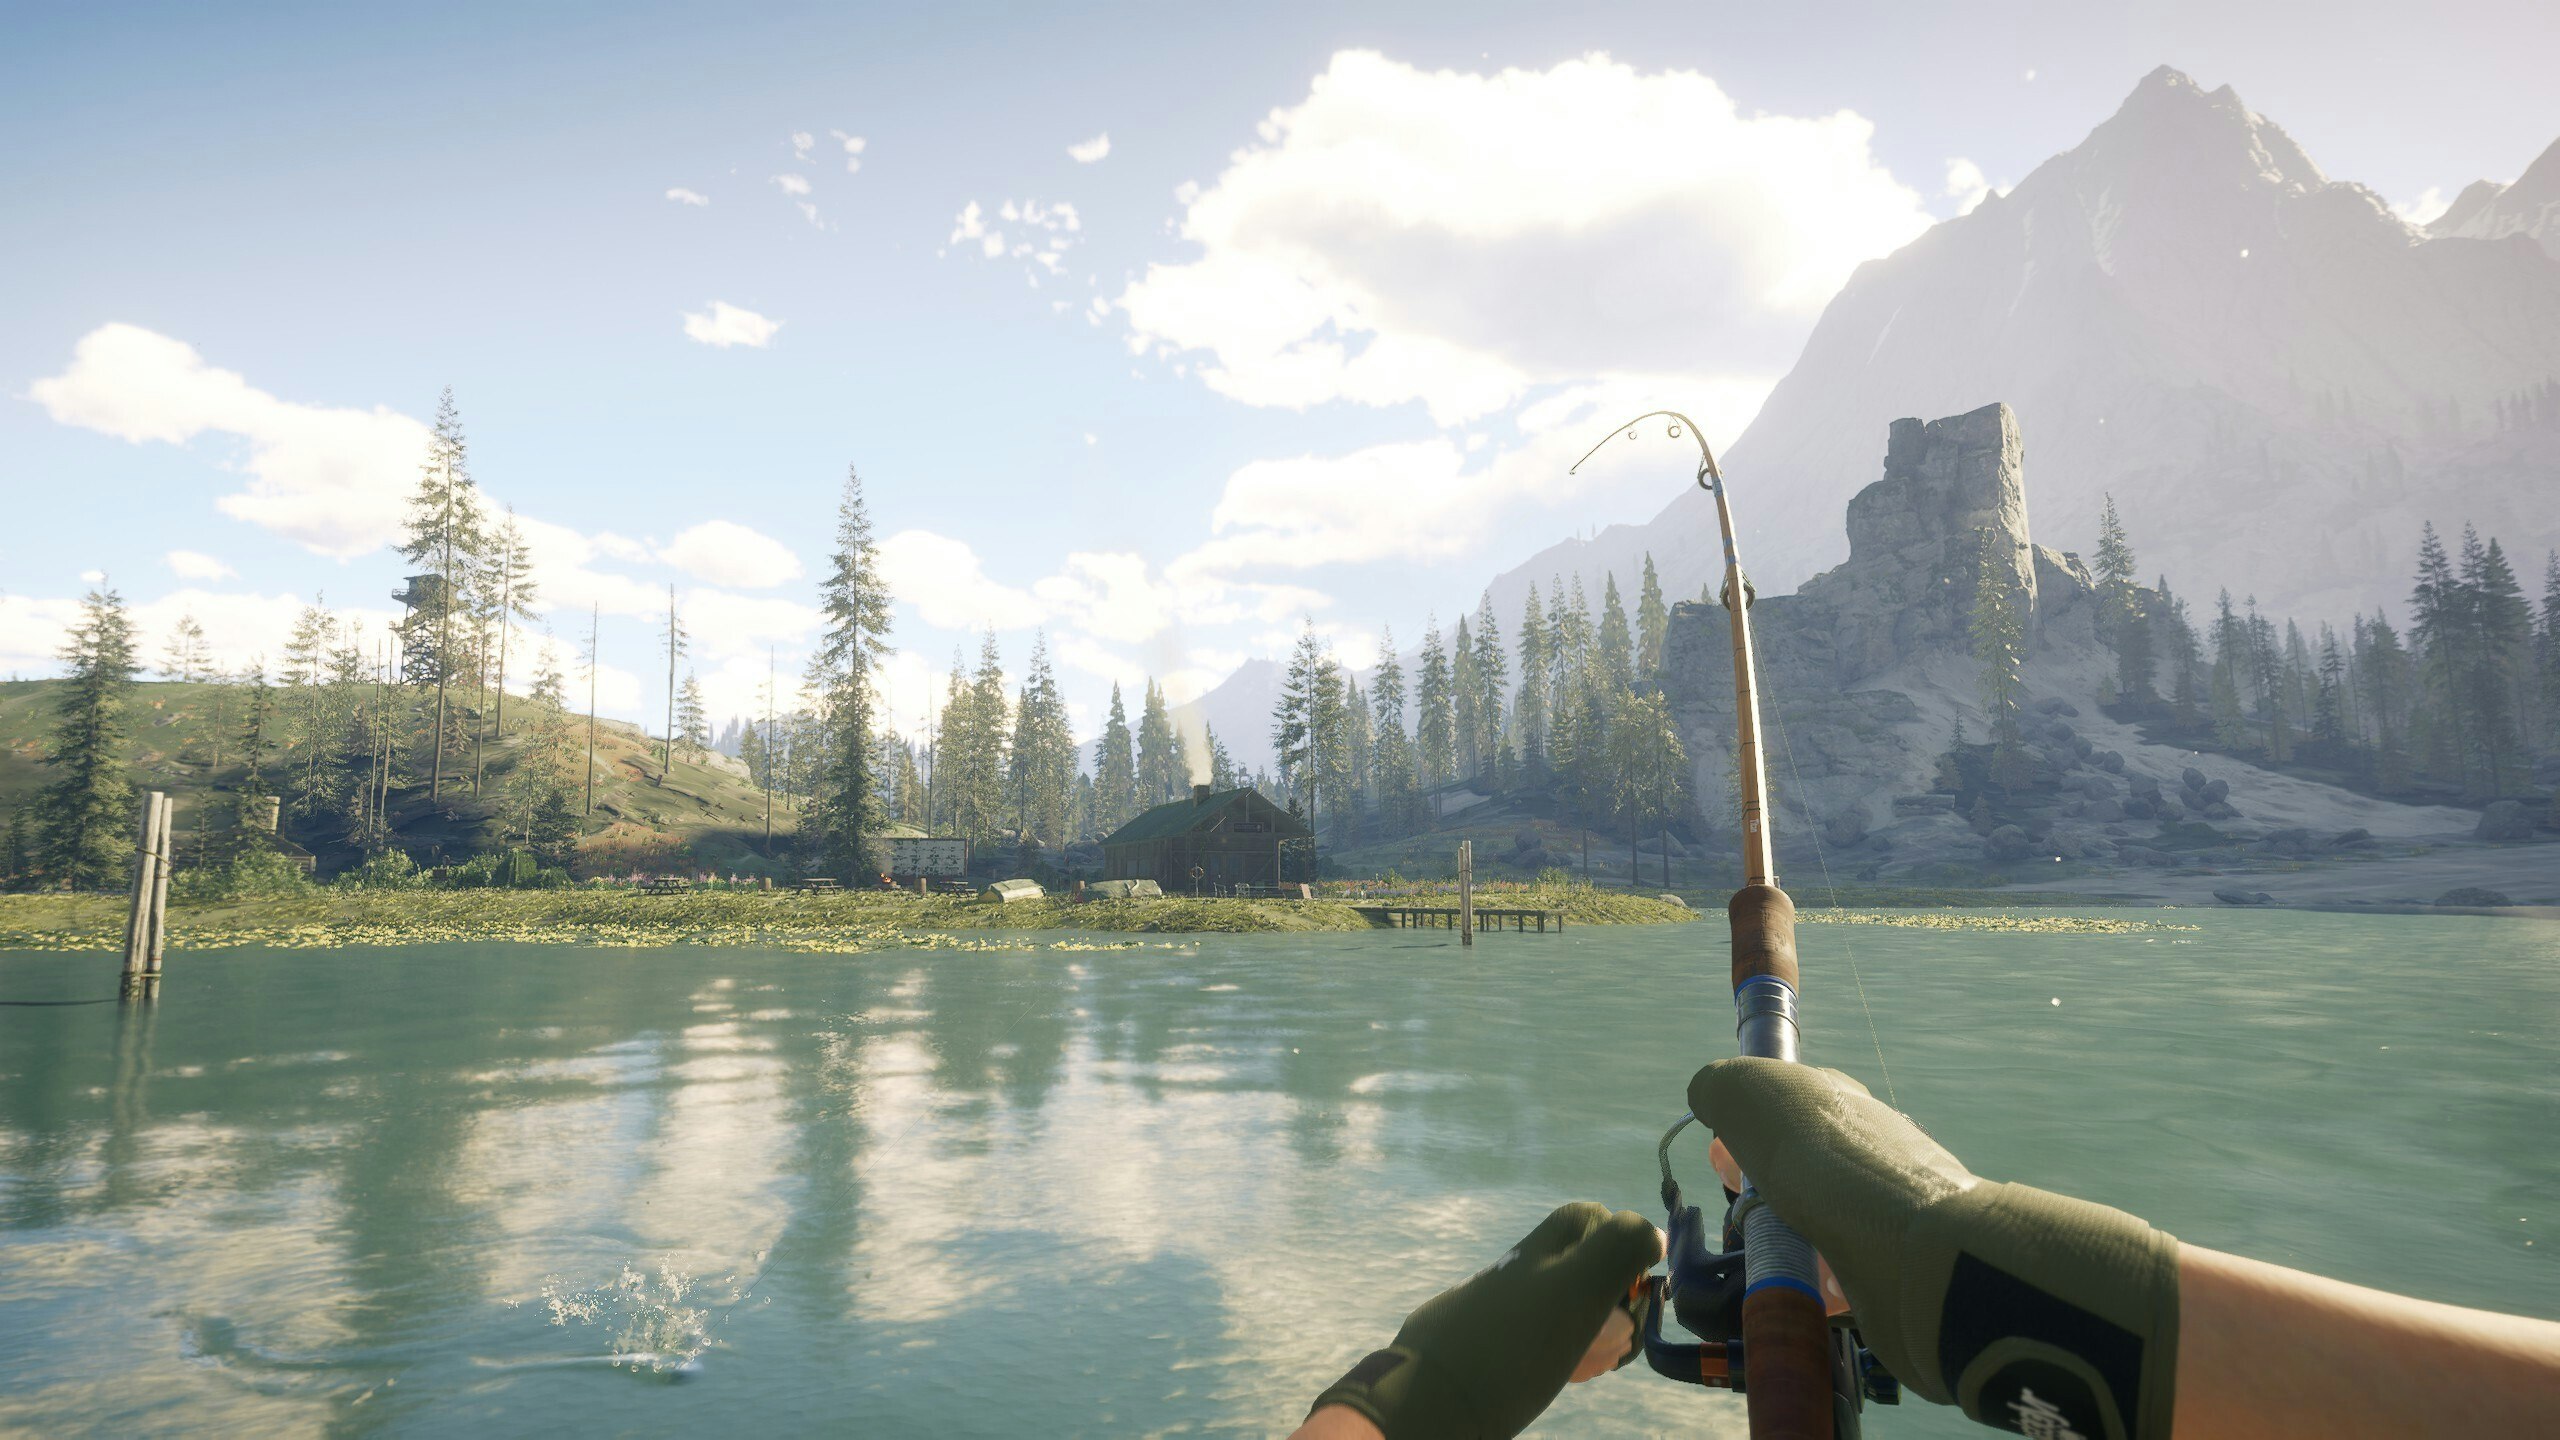 A player fighting a fish in Golden Ridge Reserve.